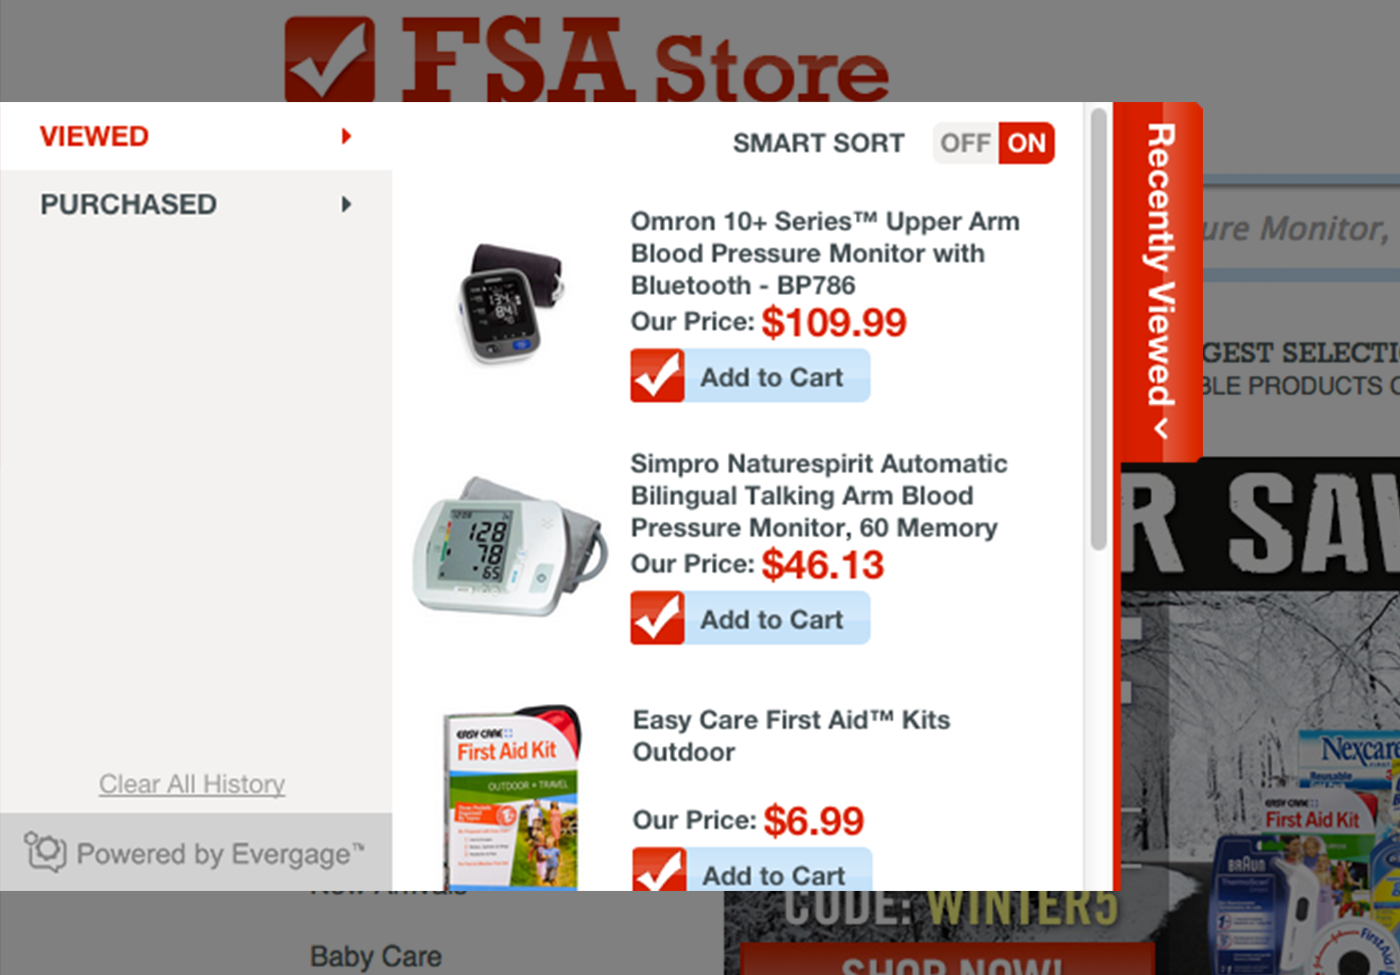 Evergage SmartHistory personalizes the shopping experience, provides convenience and value, for ecommerce site visitors